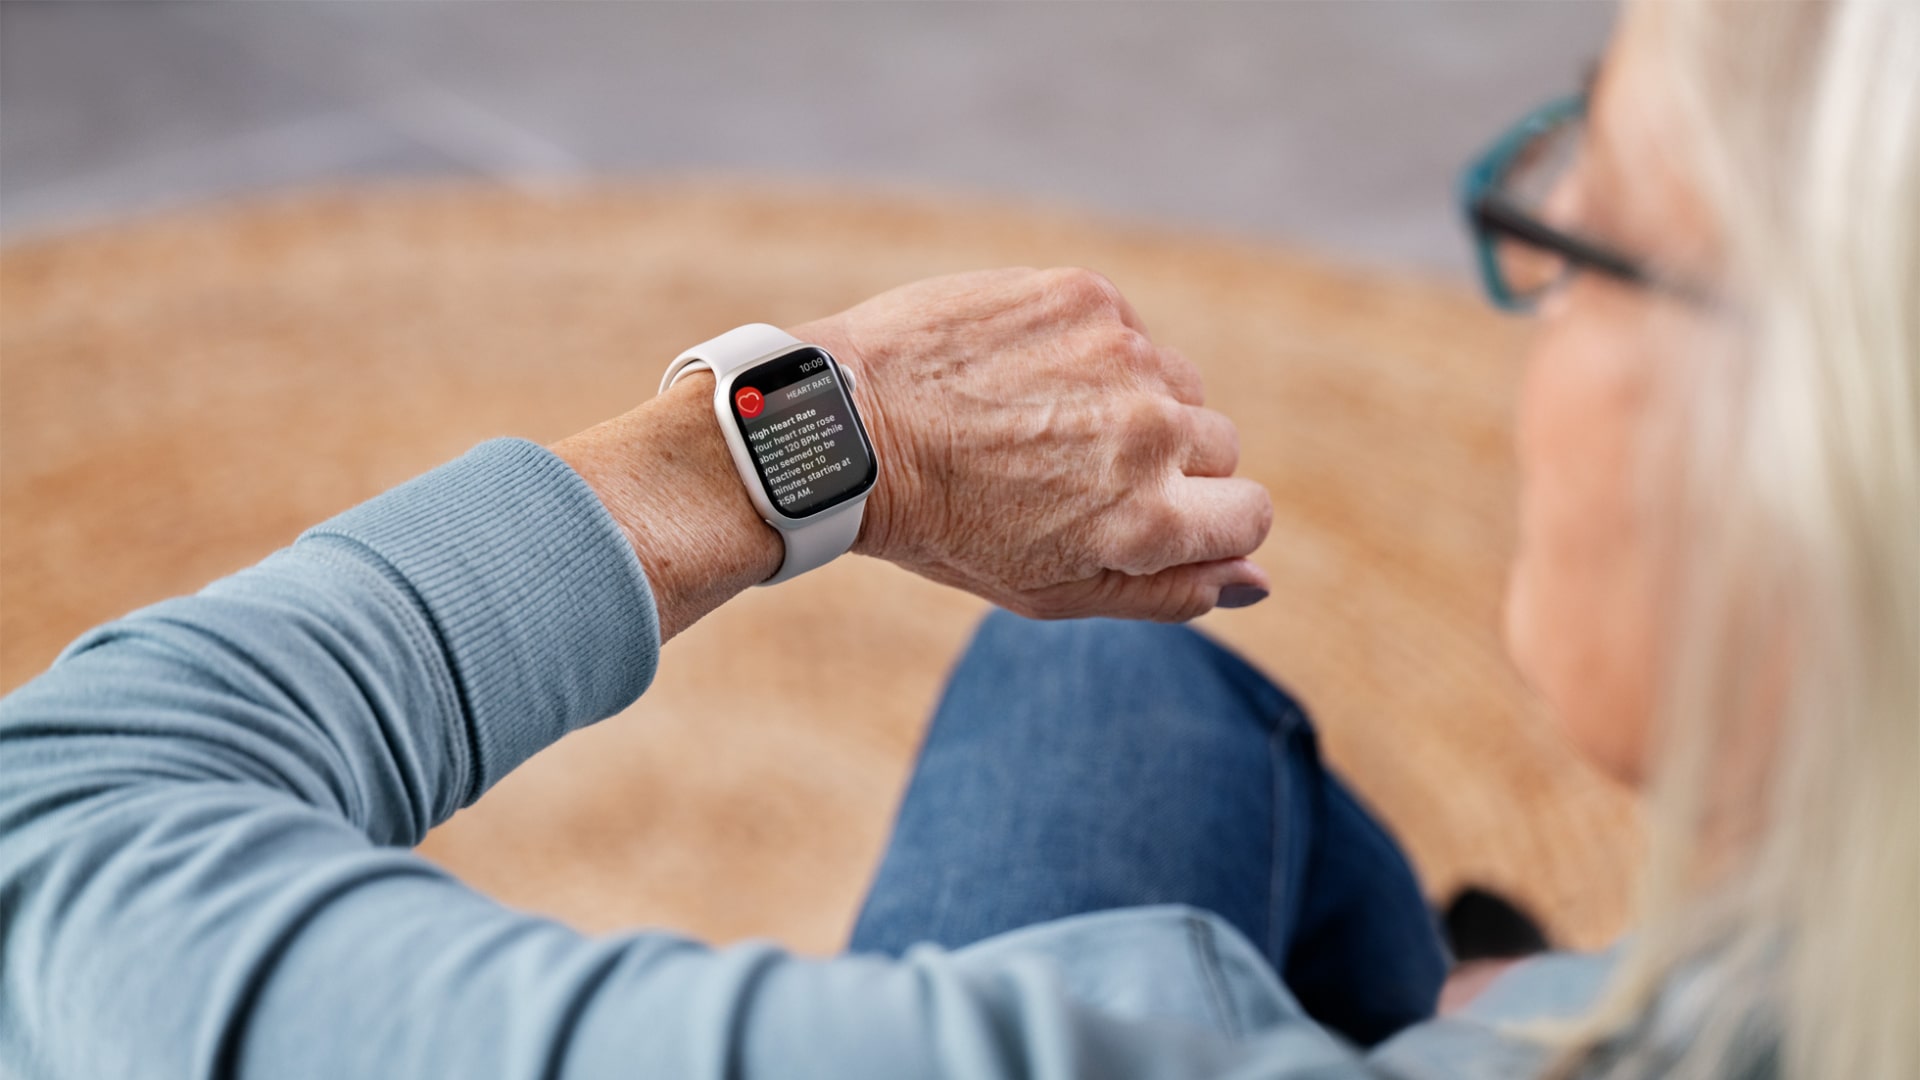 A person looks at an Apple Watch on their wrist. The device is warning them that they have a high heart rate.